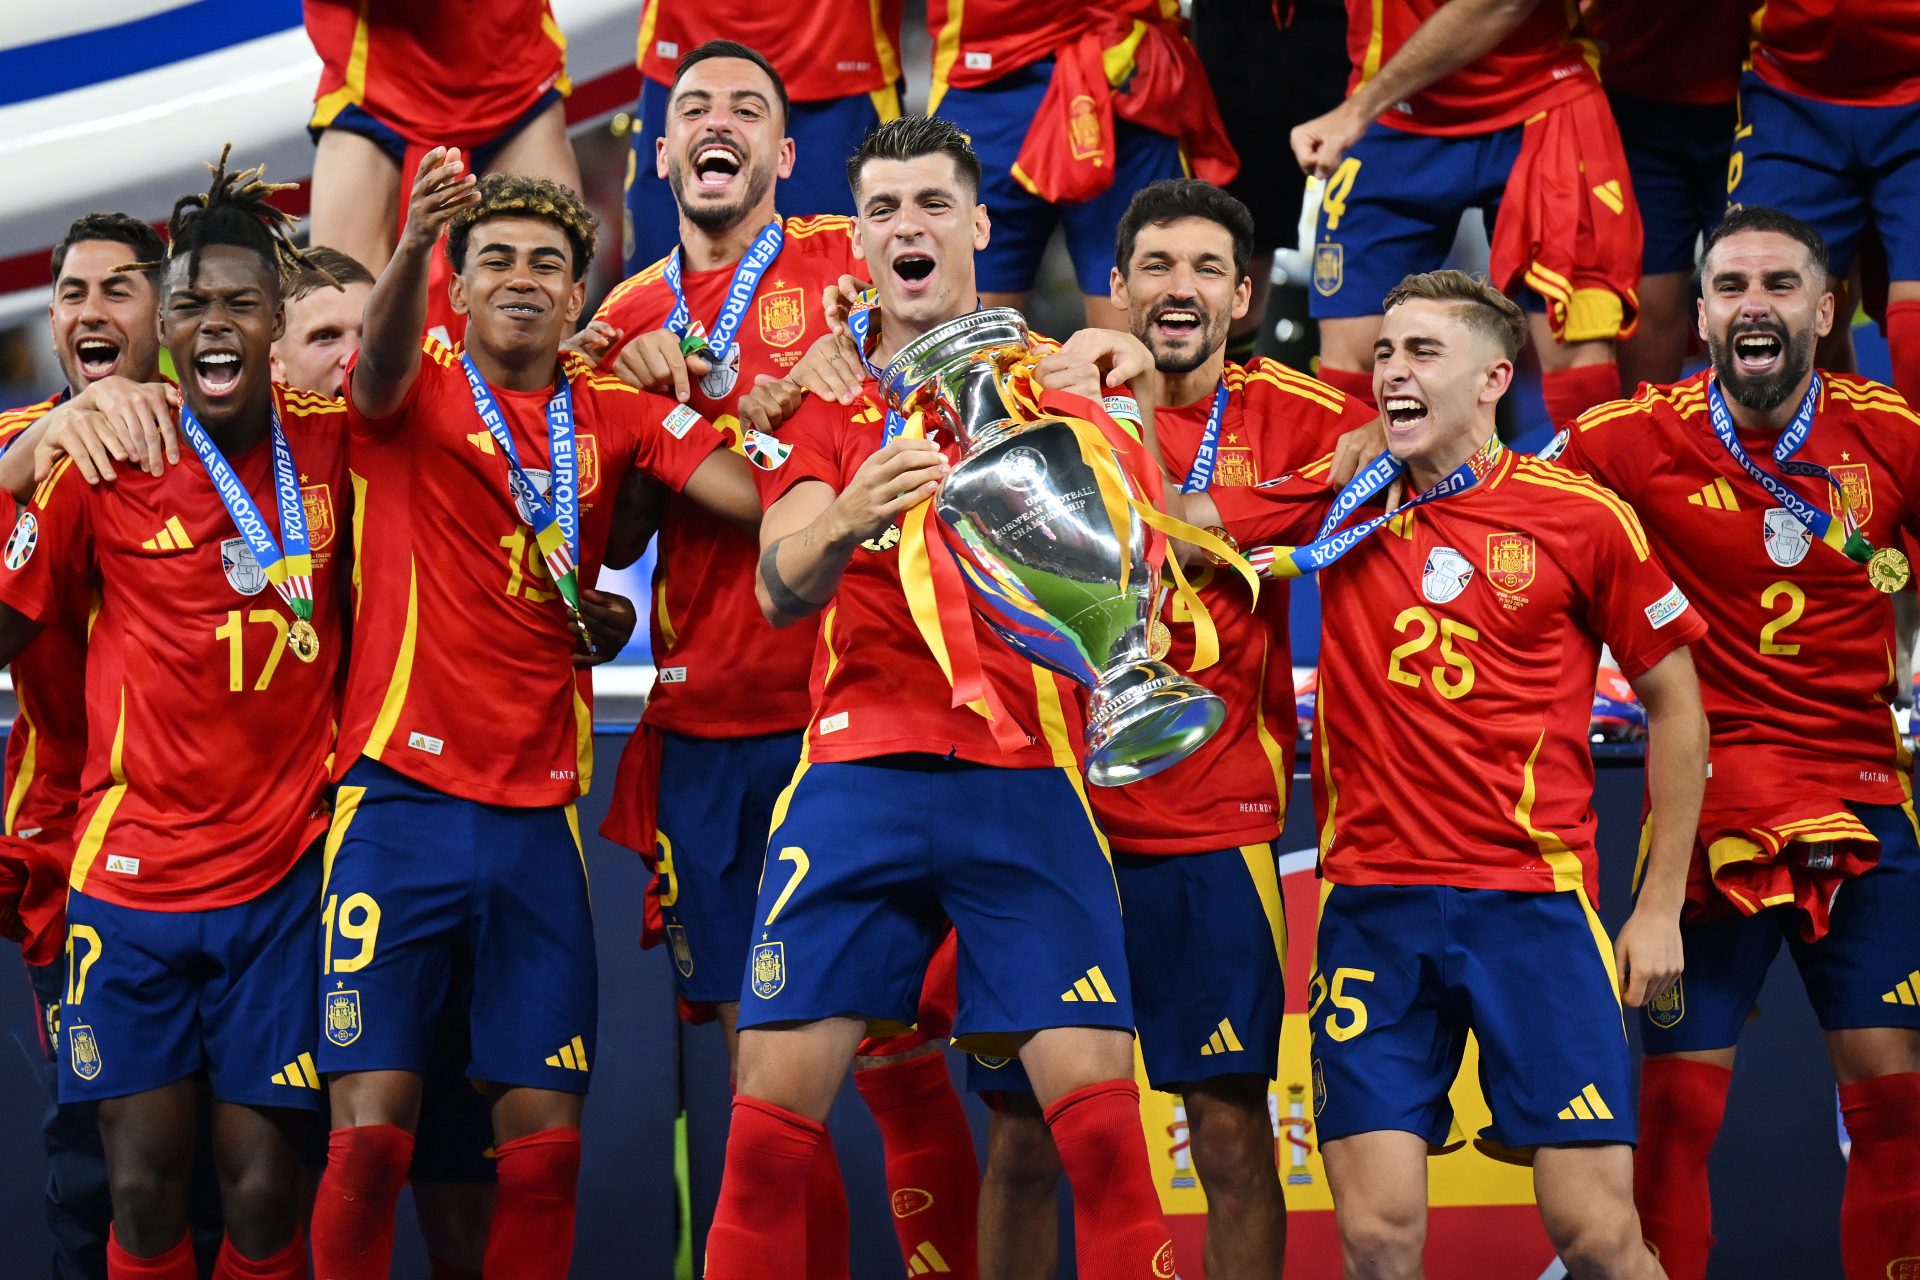 Spain take the trophy - All the winners of the UEFA European Championship football